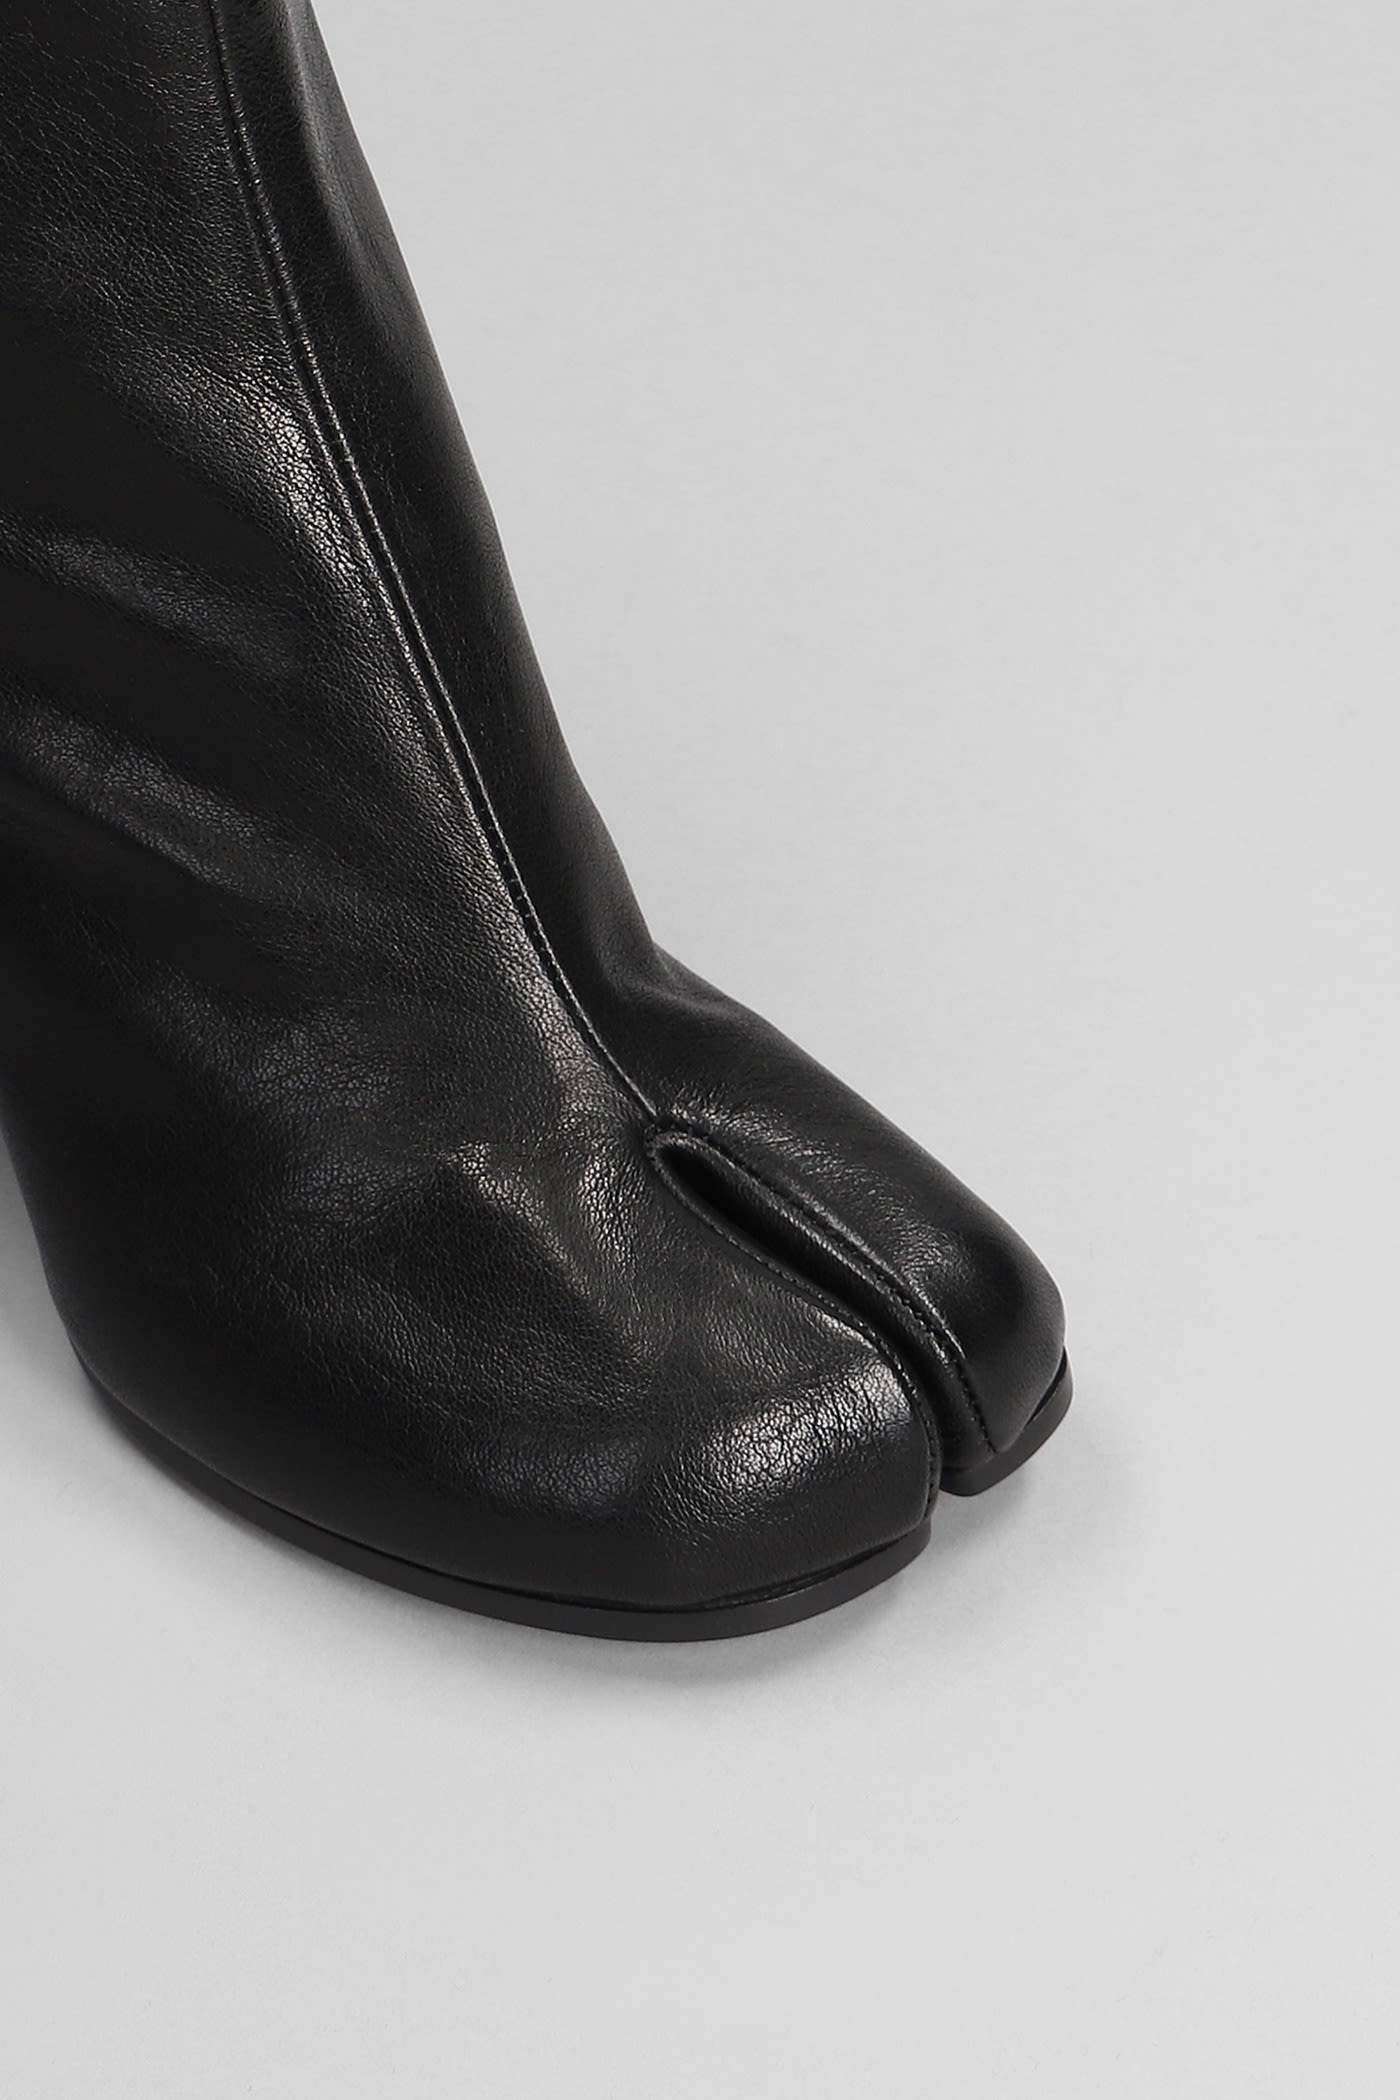 Shop Maison Margiela Tabi High Heels Ankle Boots In Black Leather